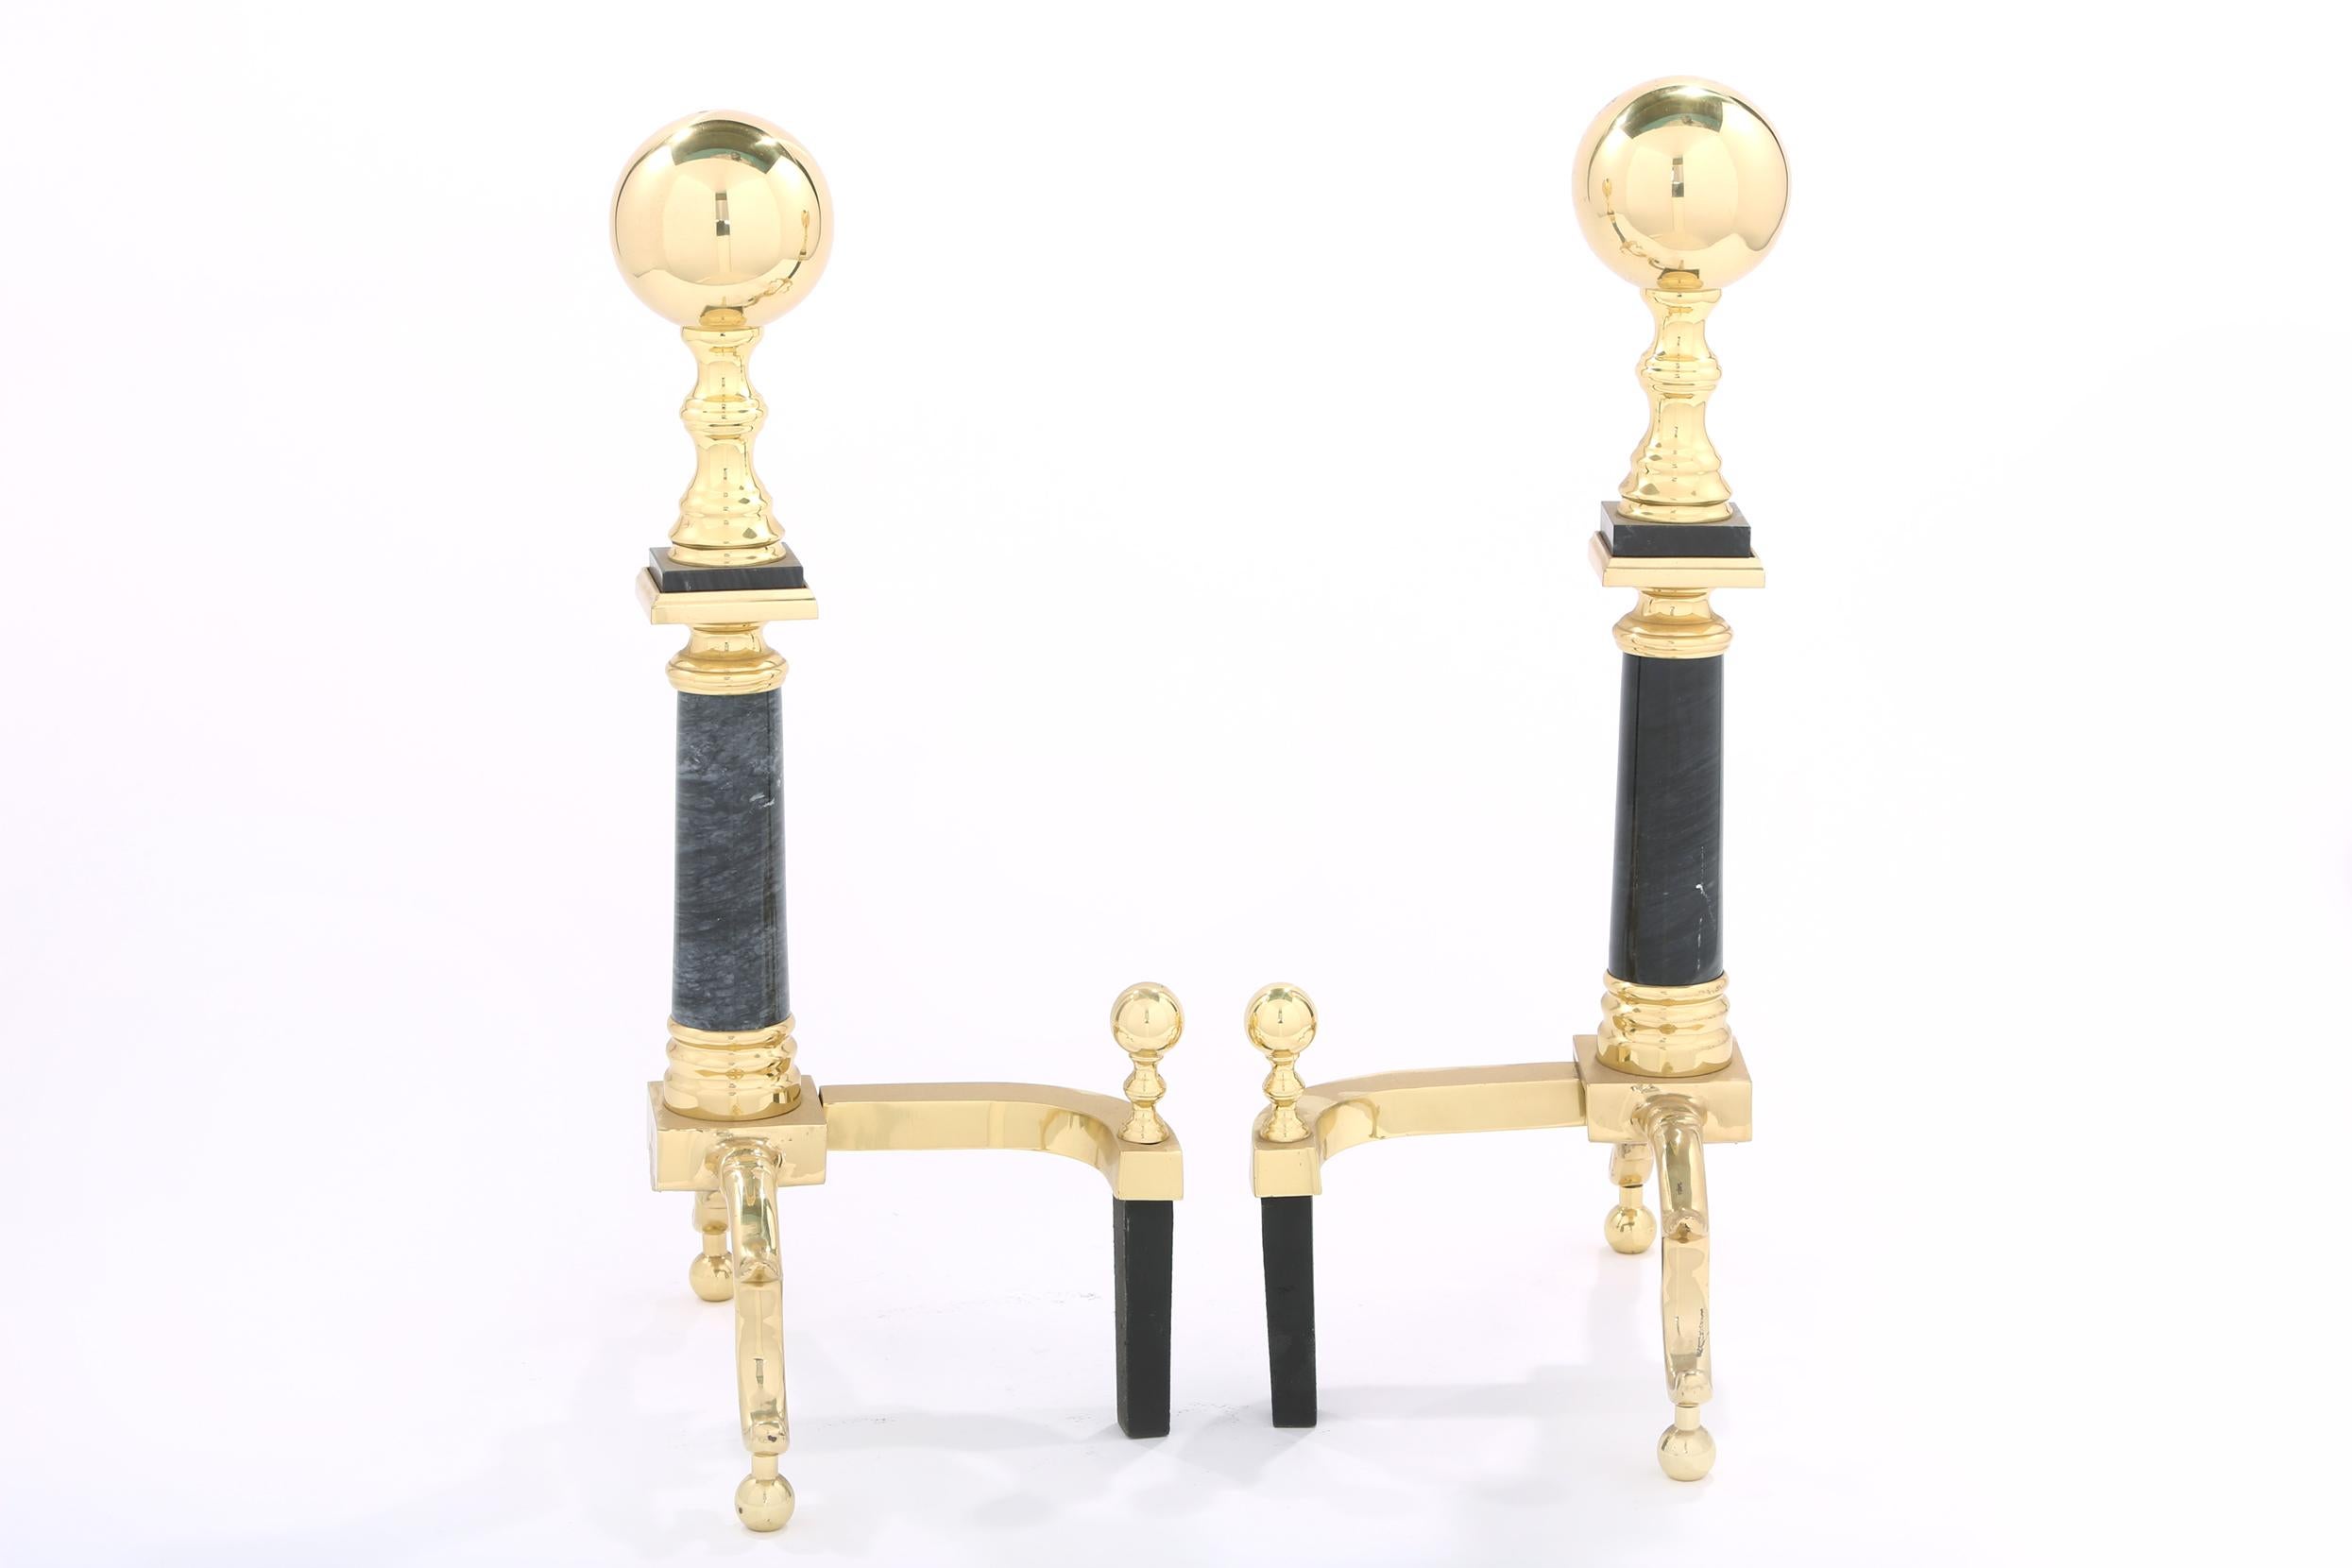 Mid 20th century solid brass with black marble regency style pair of andirons / fireplace accessories with exterior design details. Each one is in good condition. Each one stand about 22 inches high x 13 inches wide x 9 inches deep.